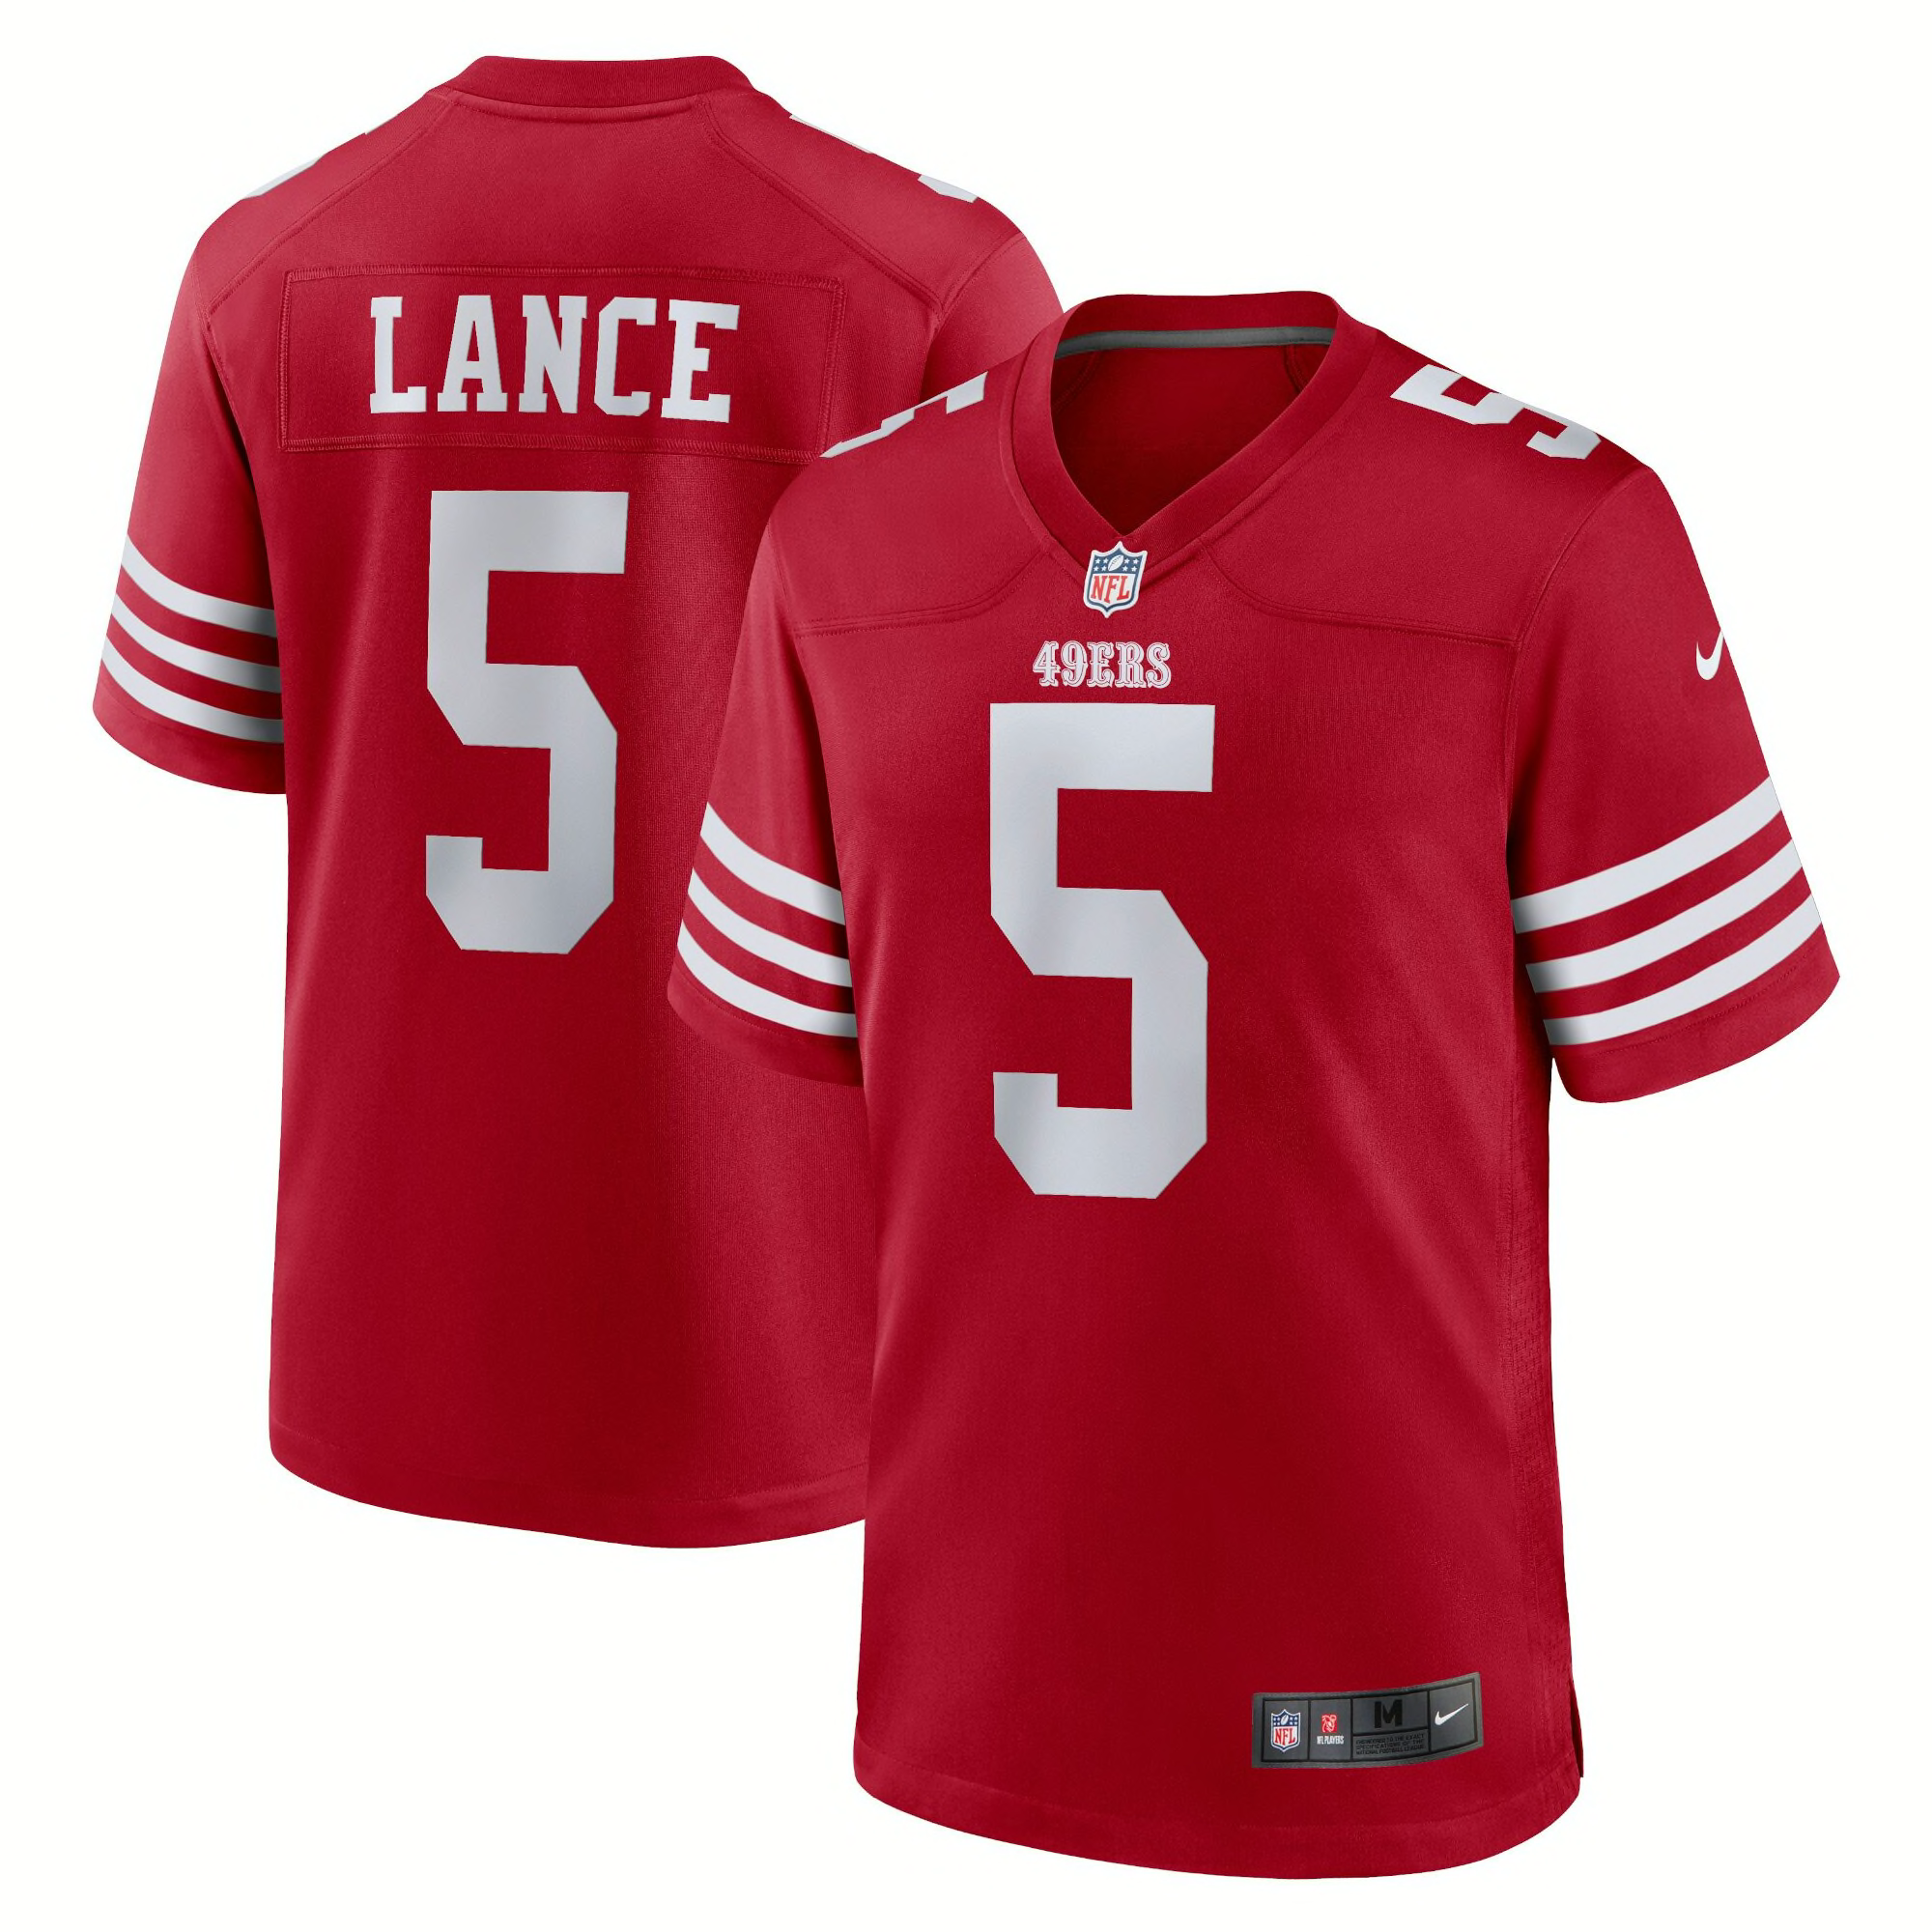 New for '22: Order your new San Francisco 49ers jersey today